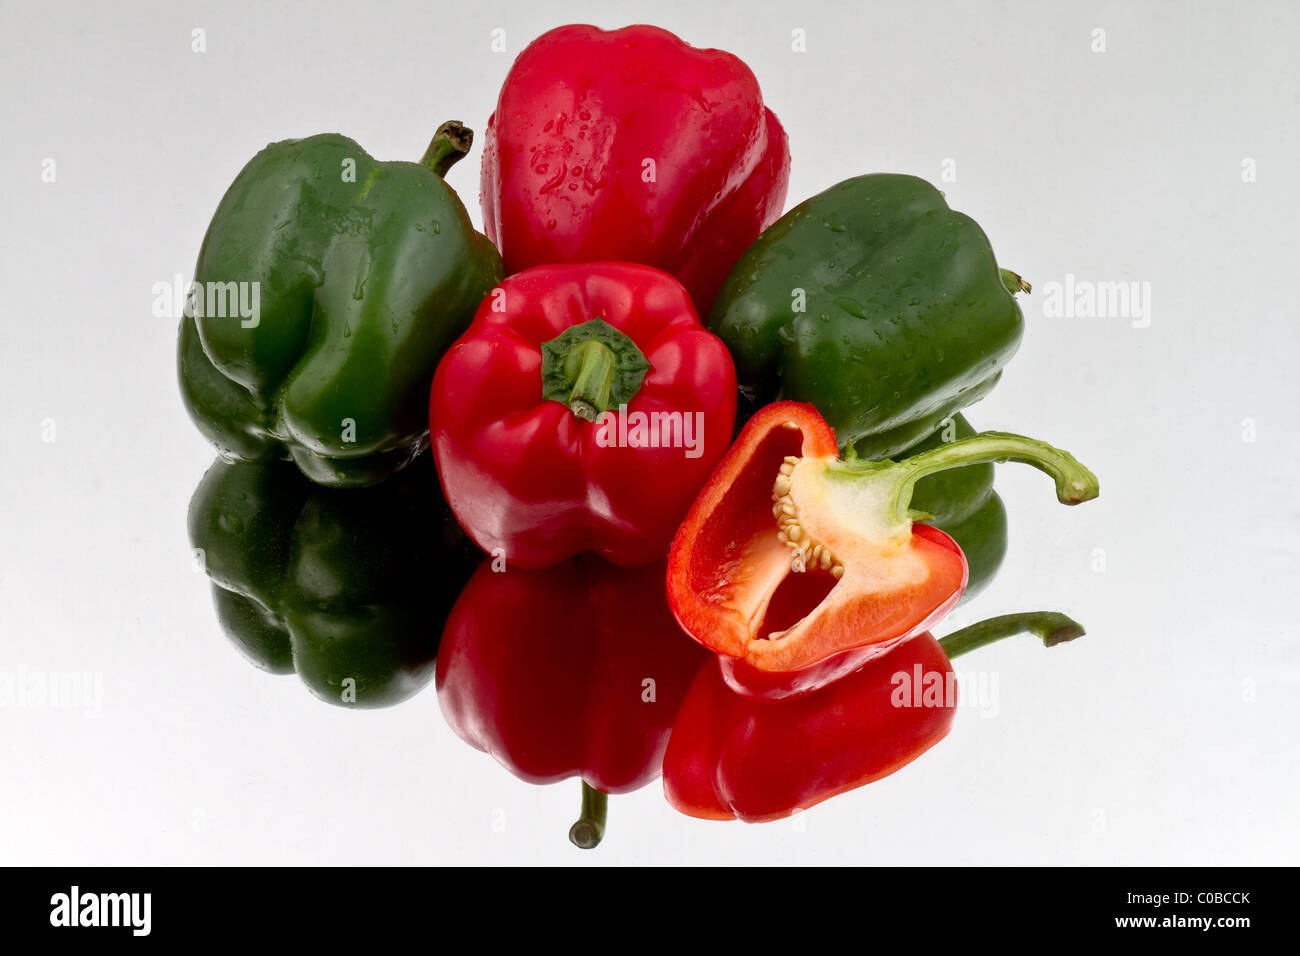 Red and green bell peppers and halved red bell pepper on reflective bacground Stock Photo